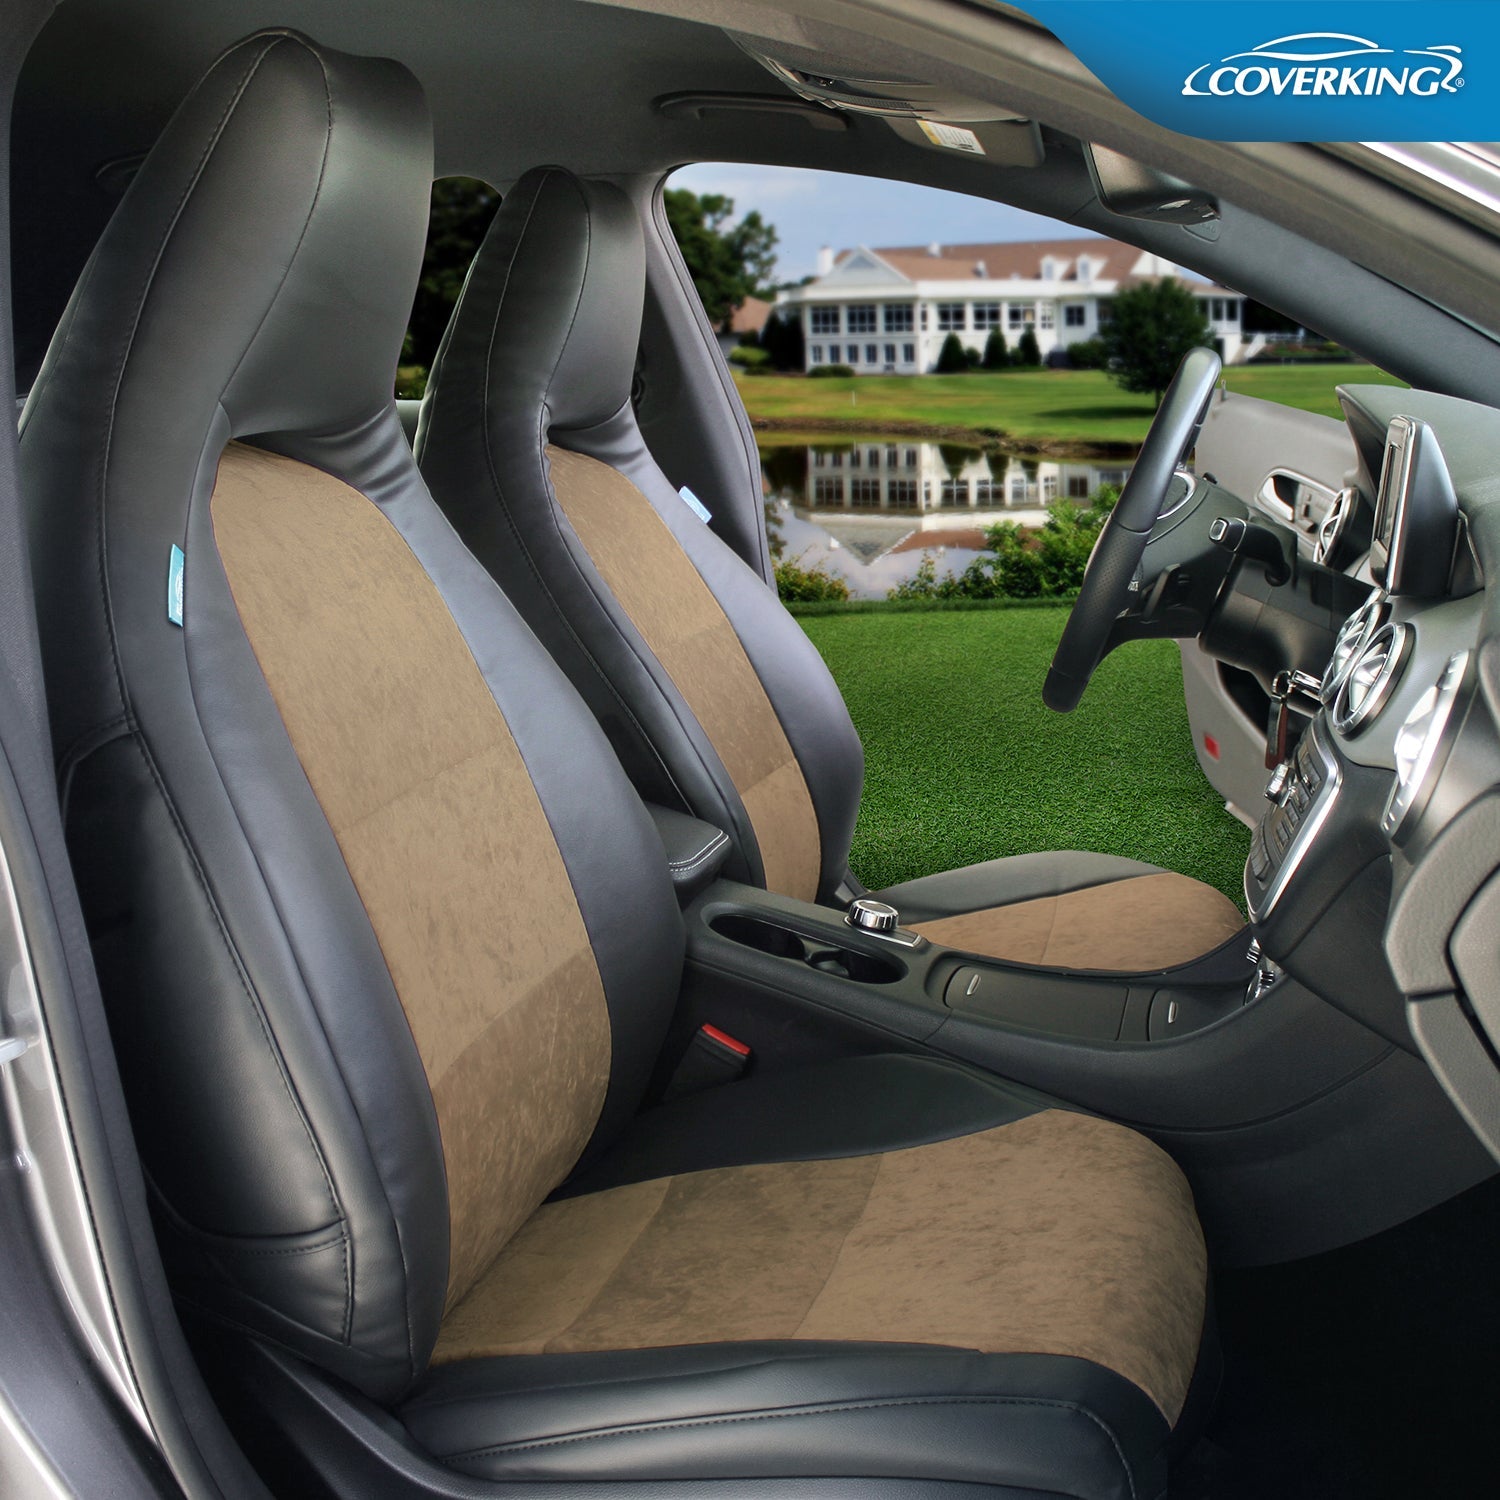 Coverking UltiSuede Seat Covers - Partsaccessoriesusa